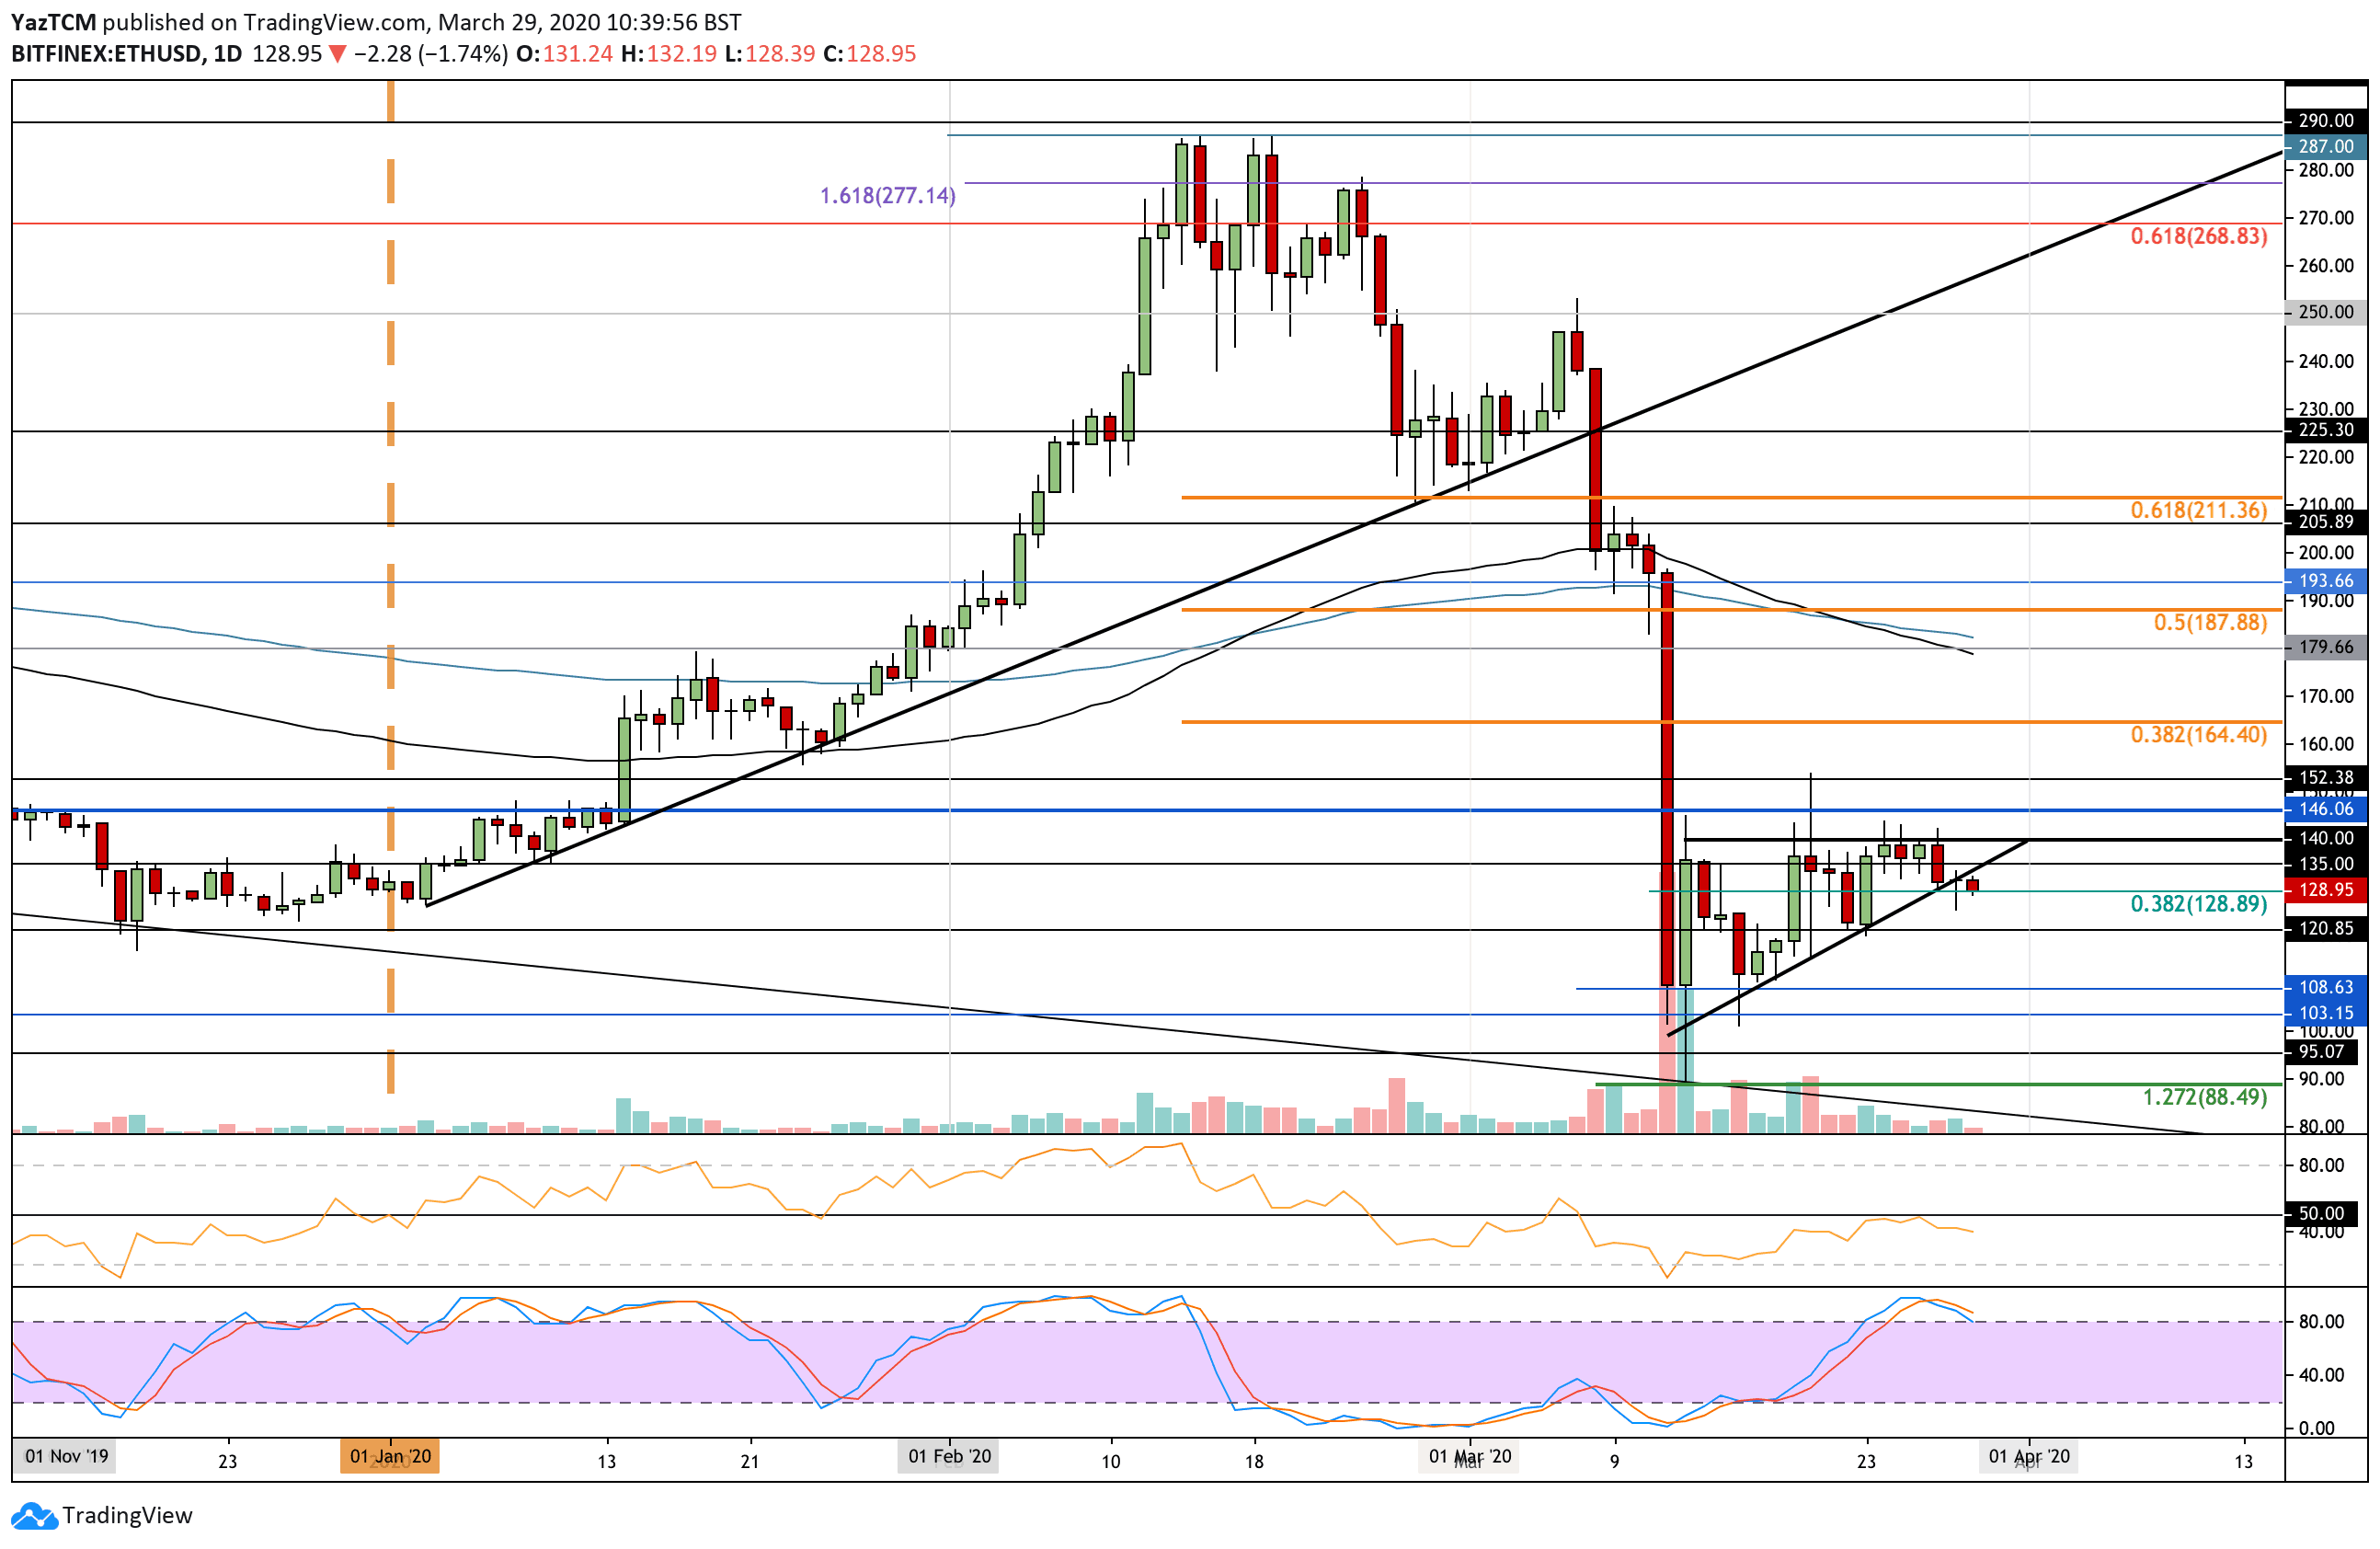 Ethereum Price Analysis: ETH At Support Around $130 But Looks Promising Against Bitcoin